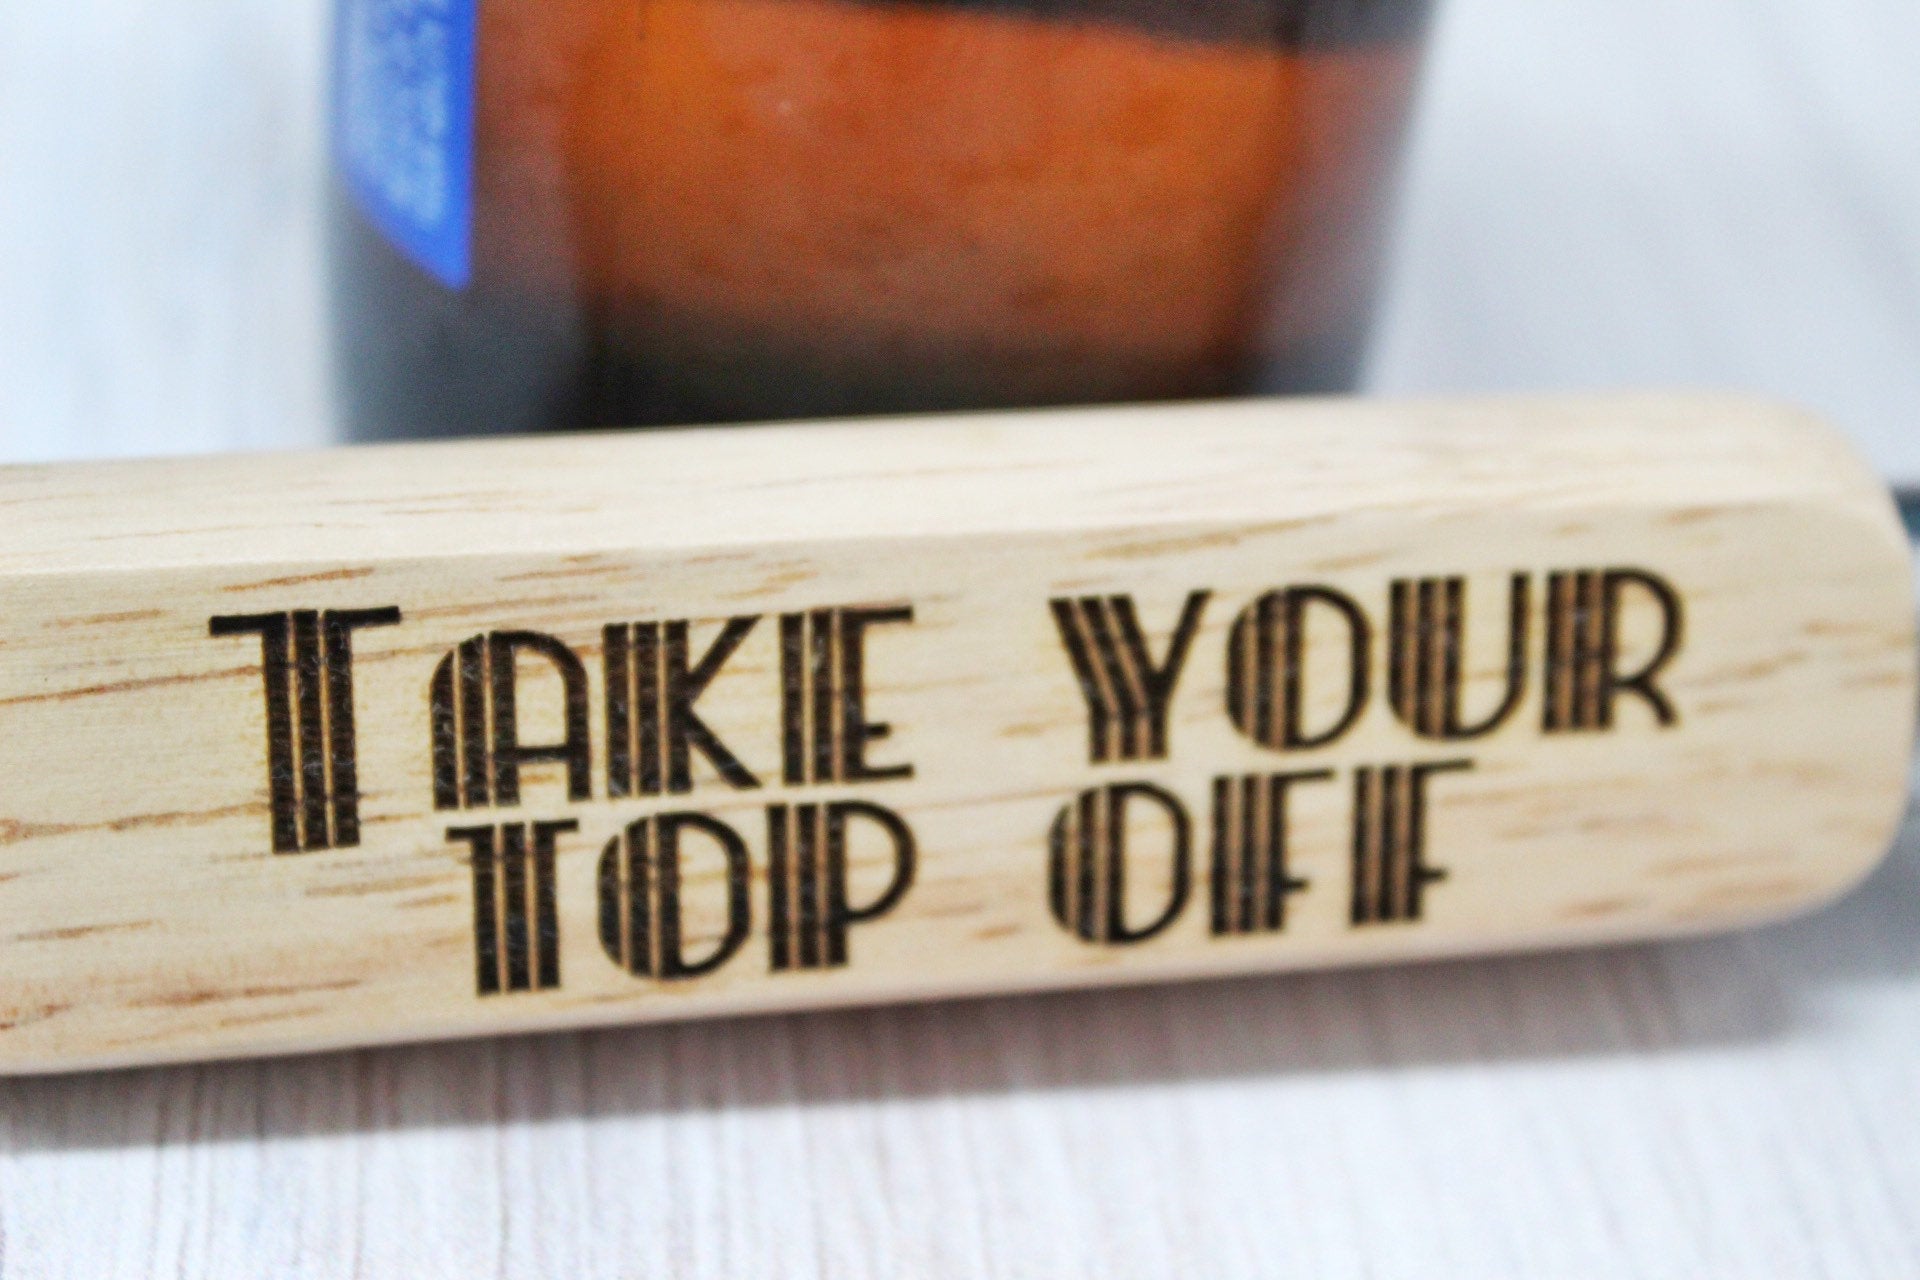 Take Your Top Off Funny Wooden Bottle Opener Party Favor Gift For Him, Funny Husband Beer Gift